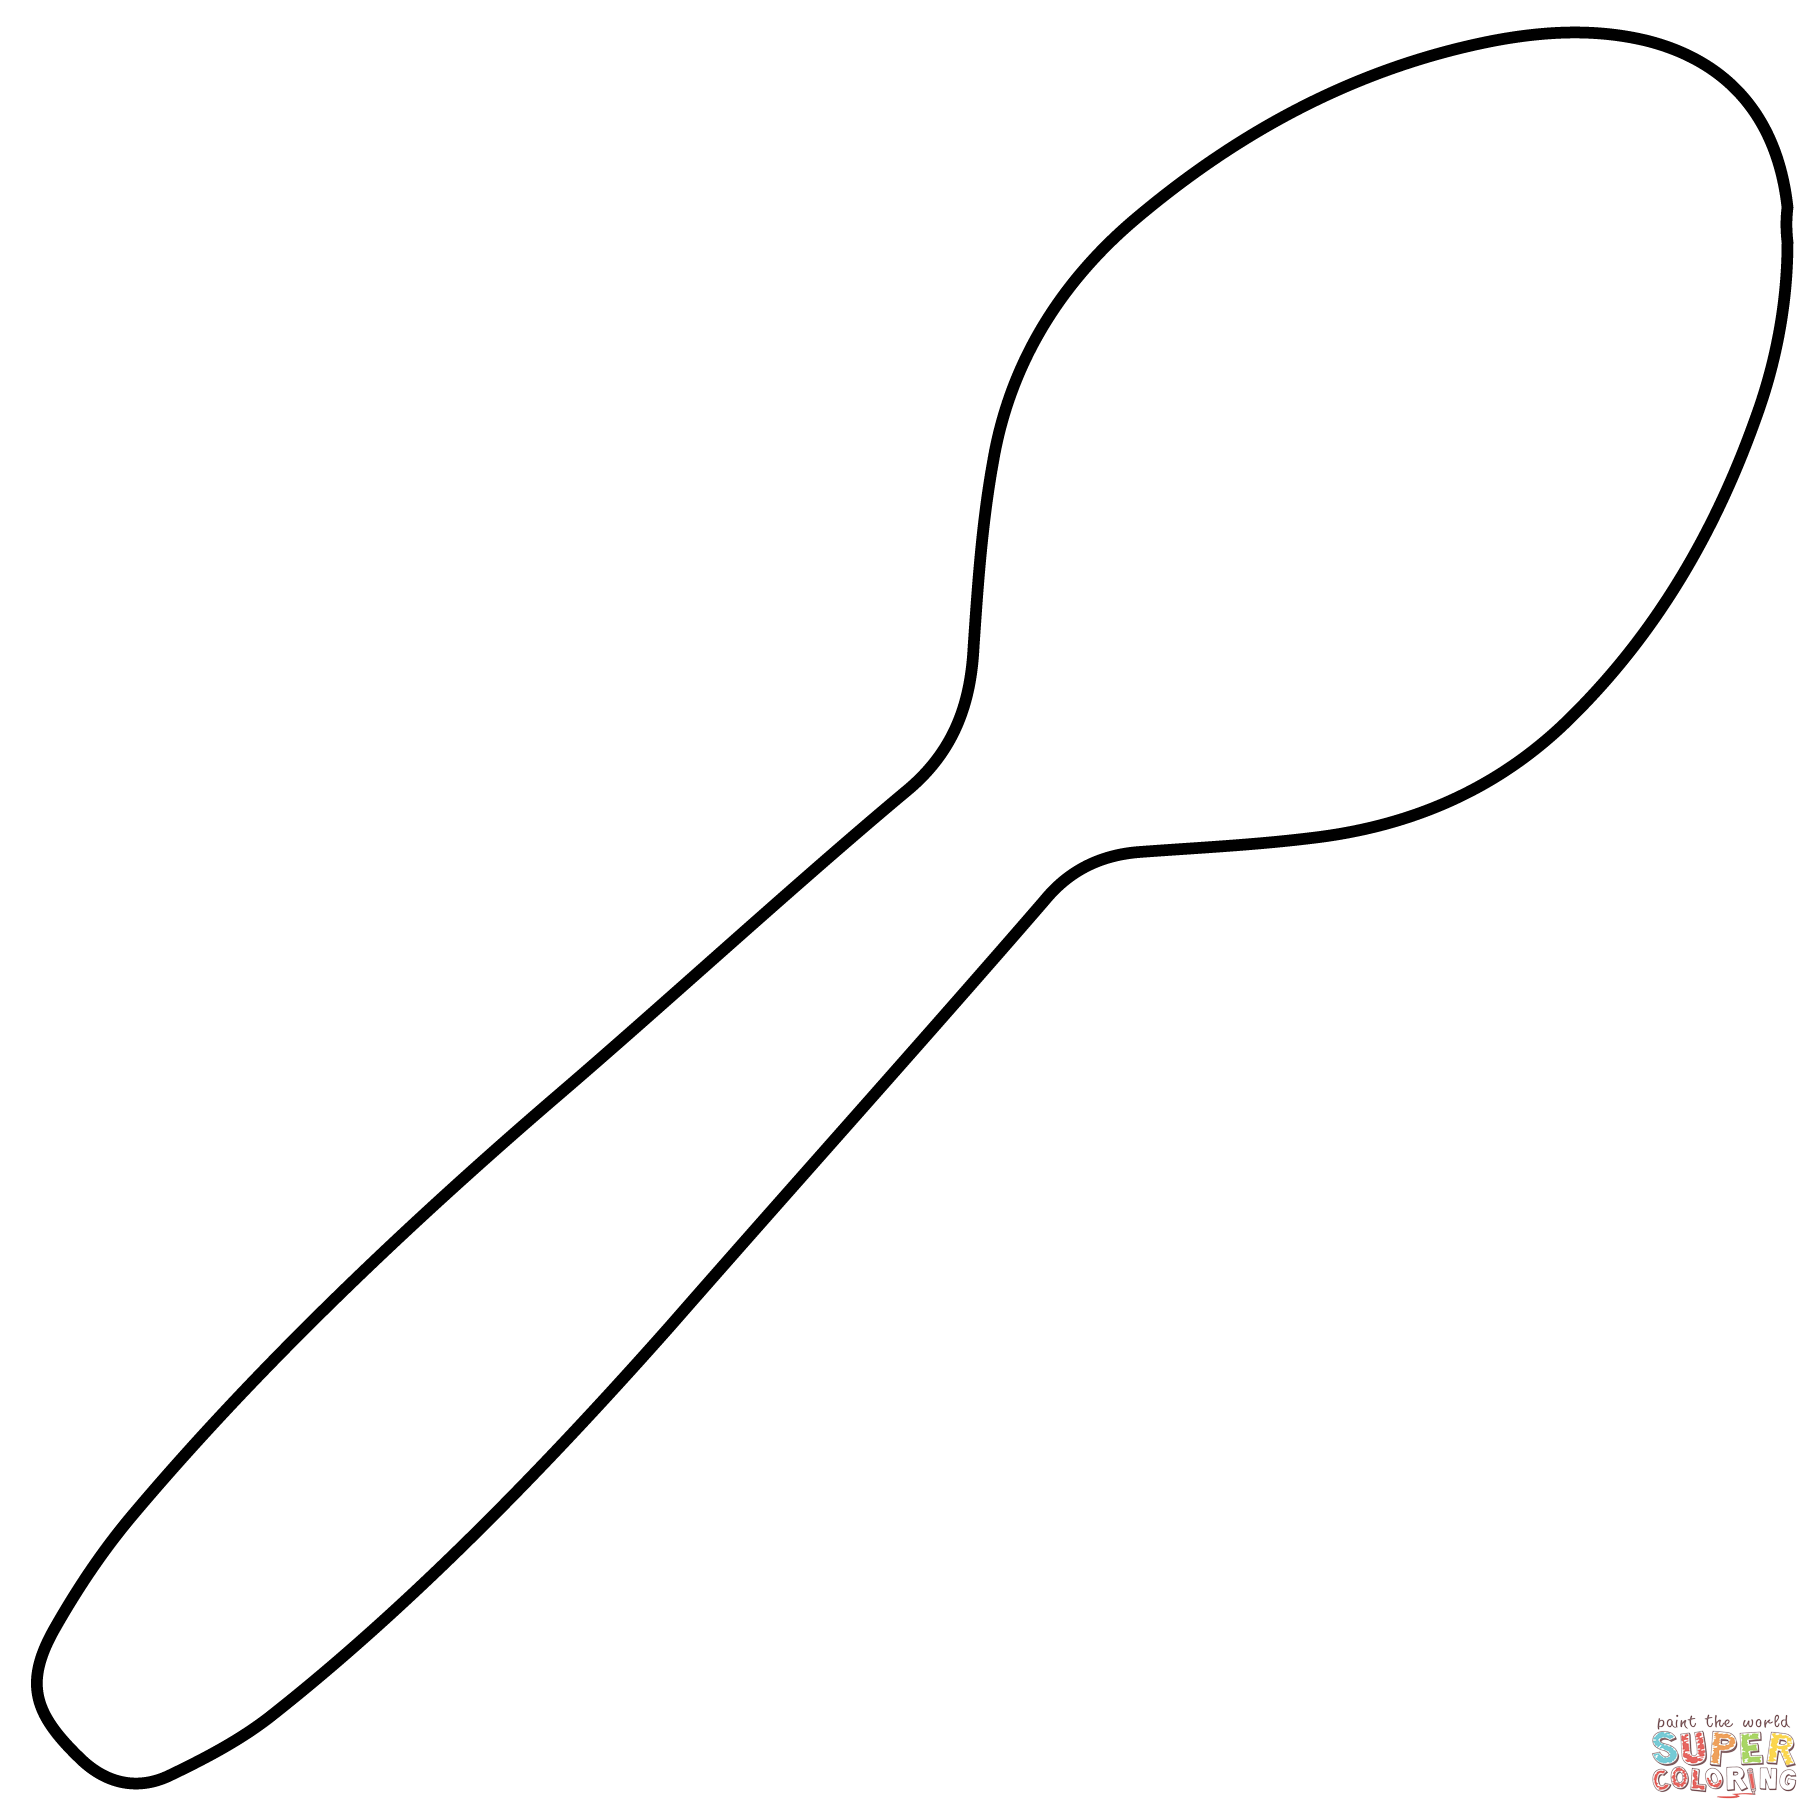 Spoon emoji coloring page free printable coloring pages